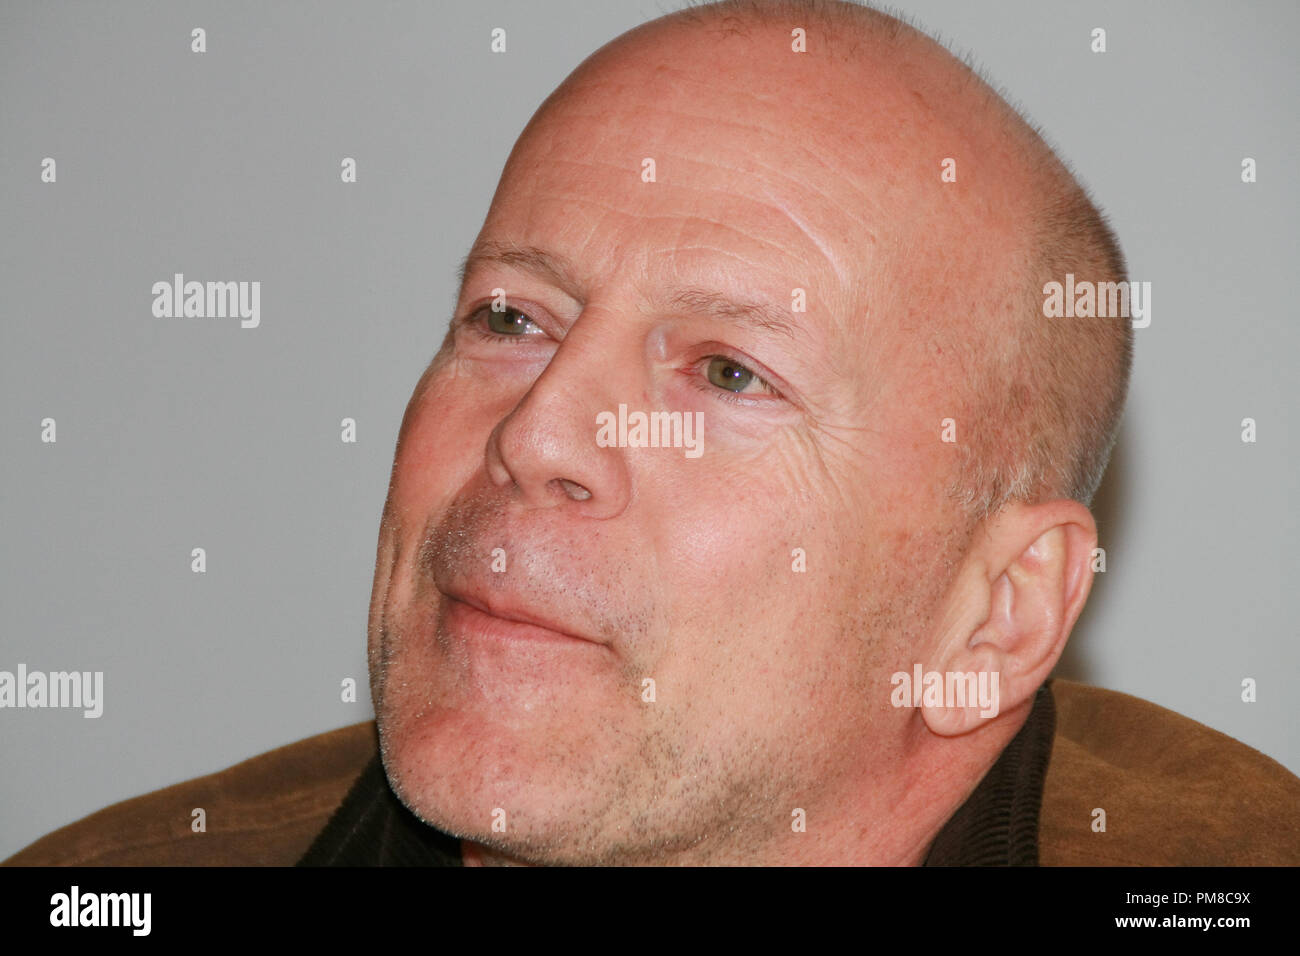 Bruce Willis 'A Good Day to Die Hard' Portrait Session, February 2, 2013. Reproduction by American tabloids is absolutely forbidden. File Reference # 31844 013JRC  For Editorial Use Only -  All Rights Reserved Stock Photo